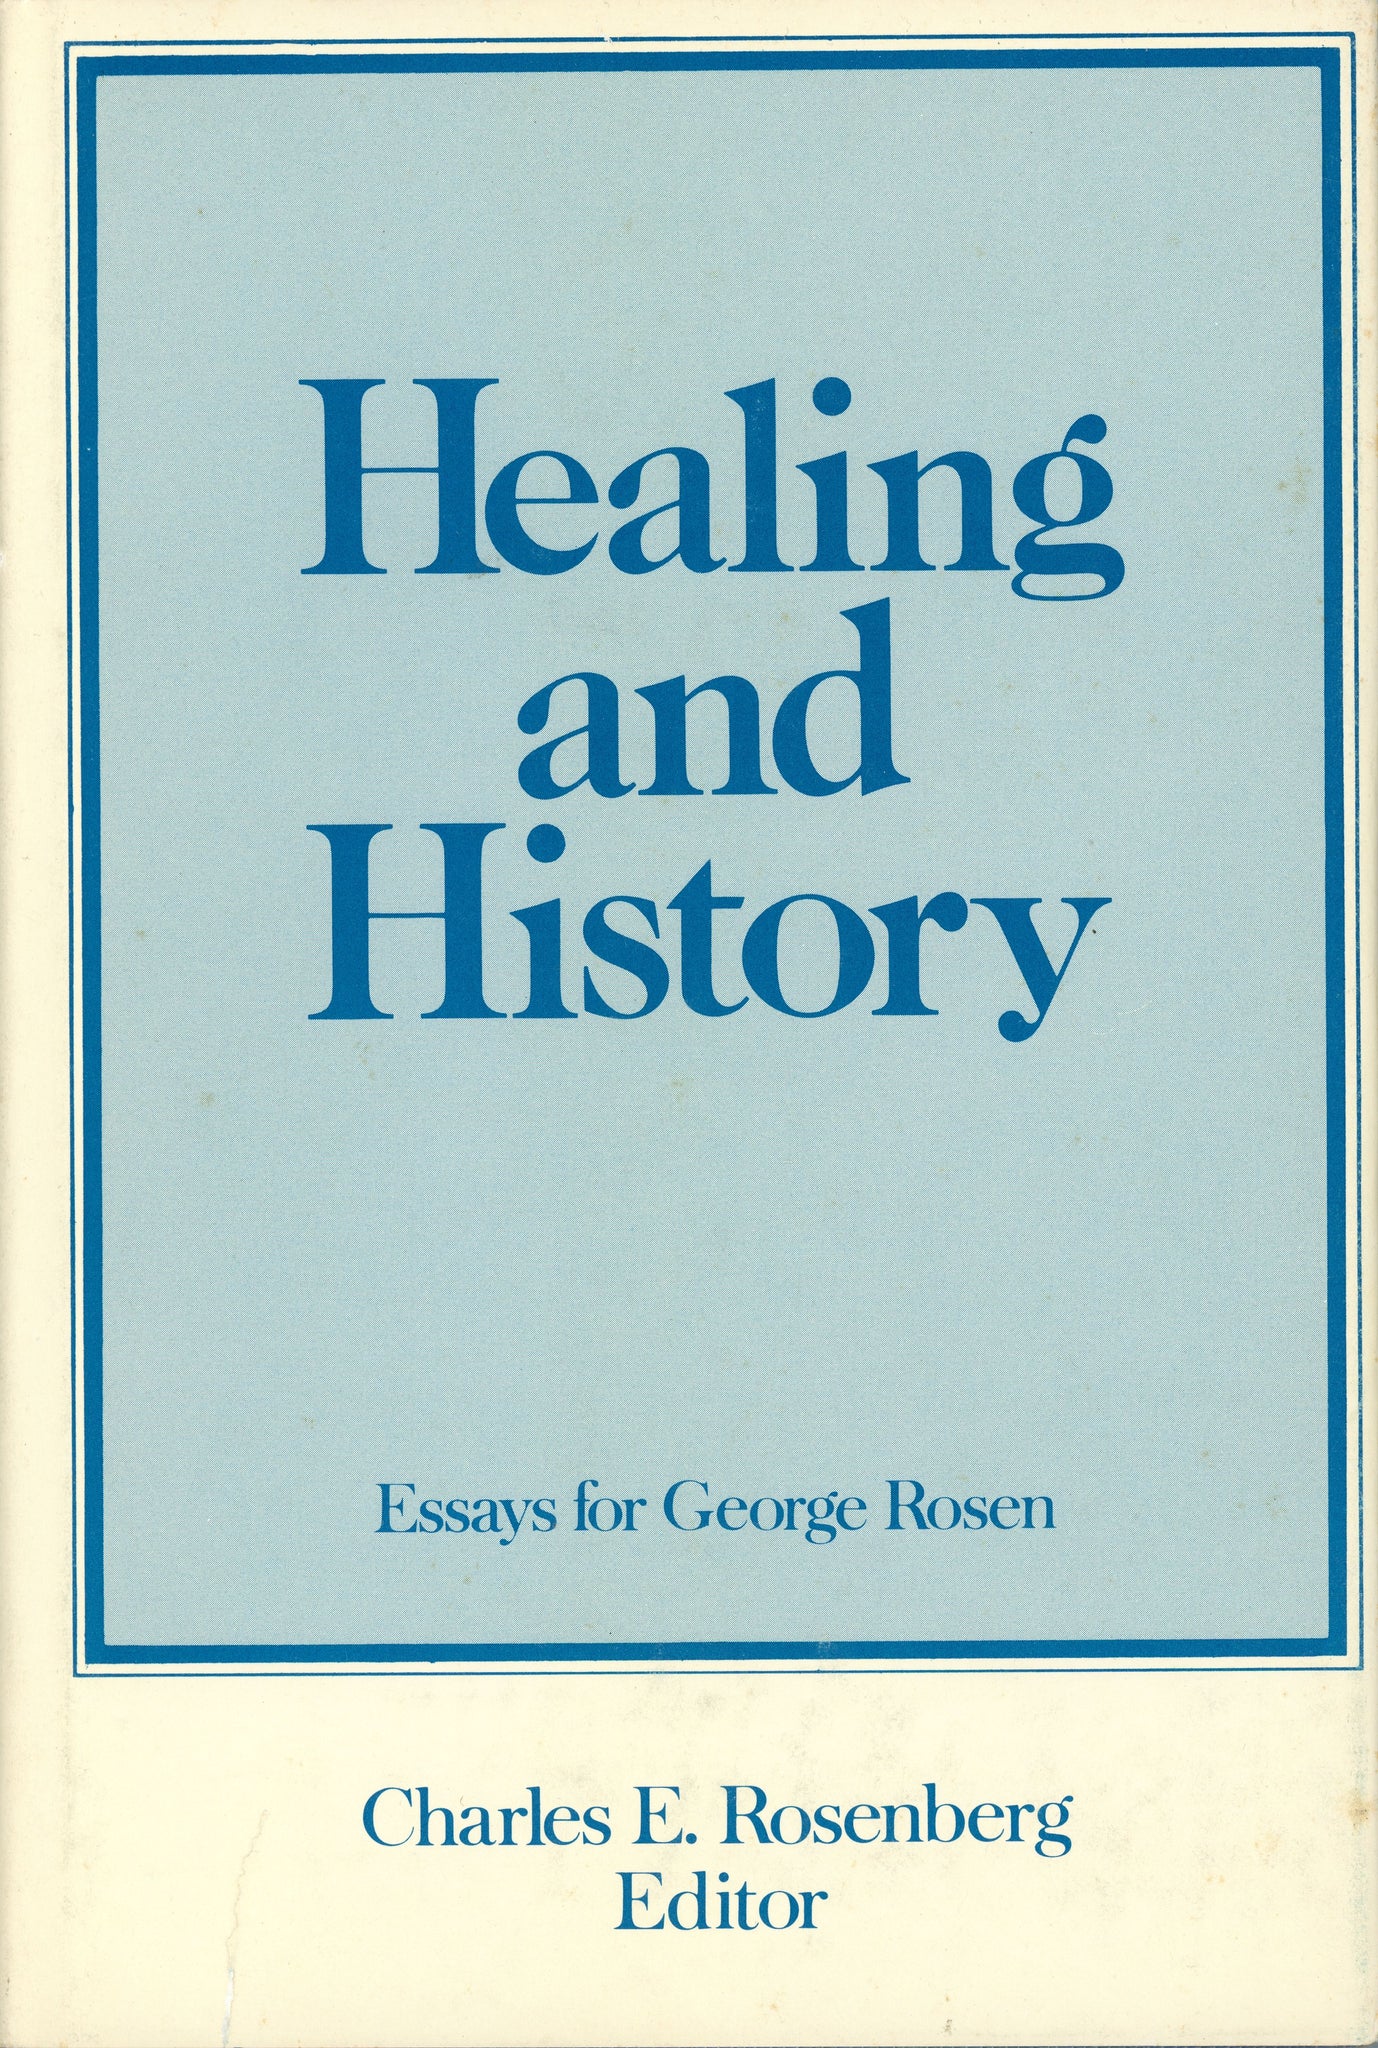 Healing and History: Essays for George Rosen